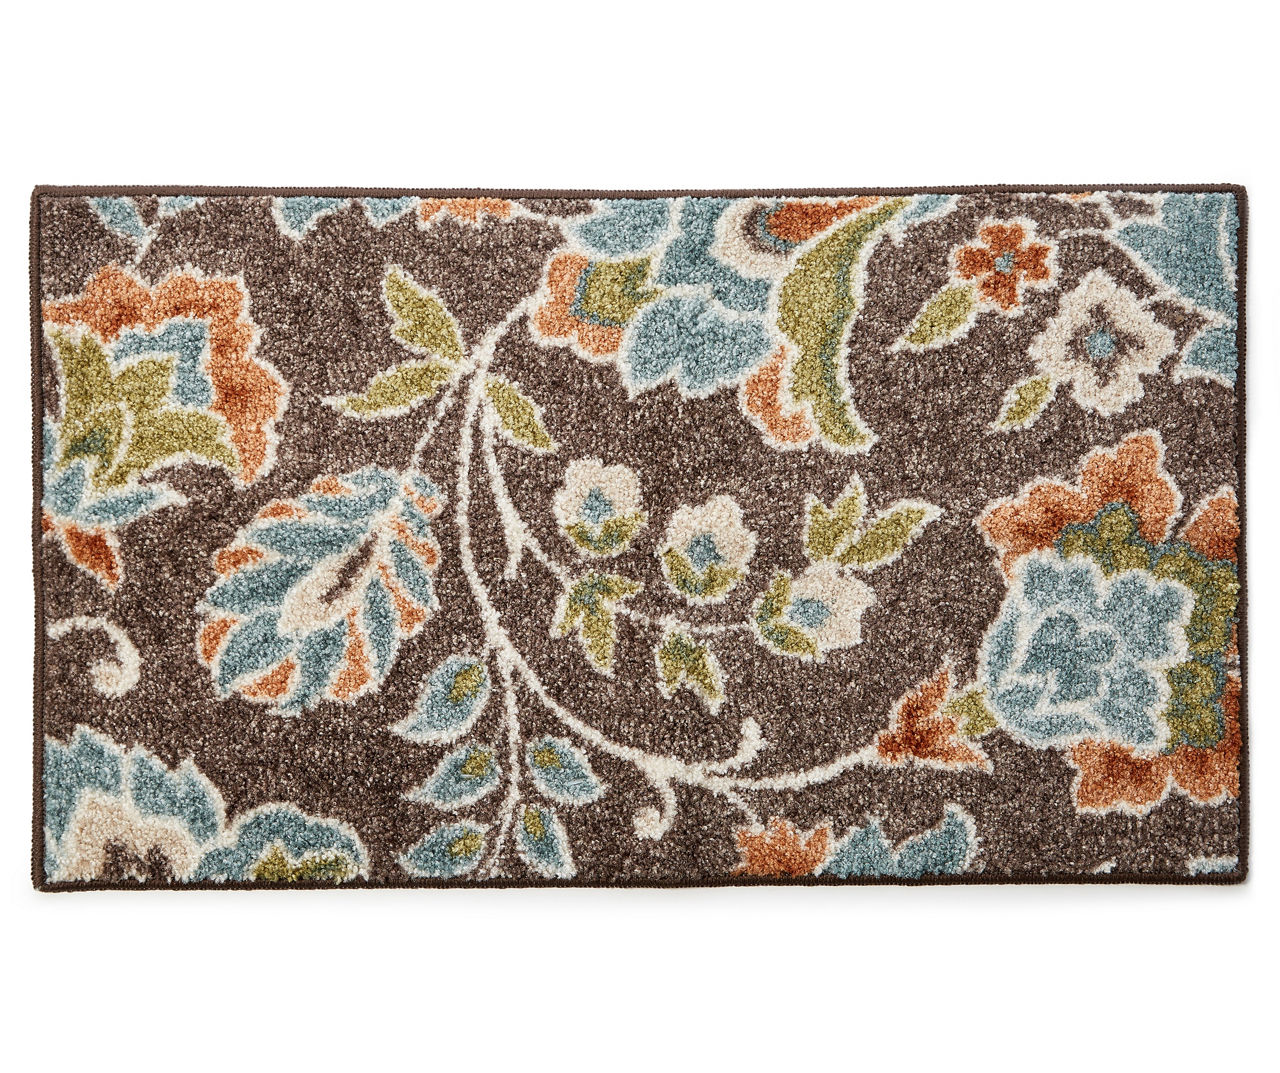 Medley Brown Flowers Jacobean Accent Rug, (1'8" x 2'10")